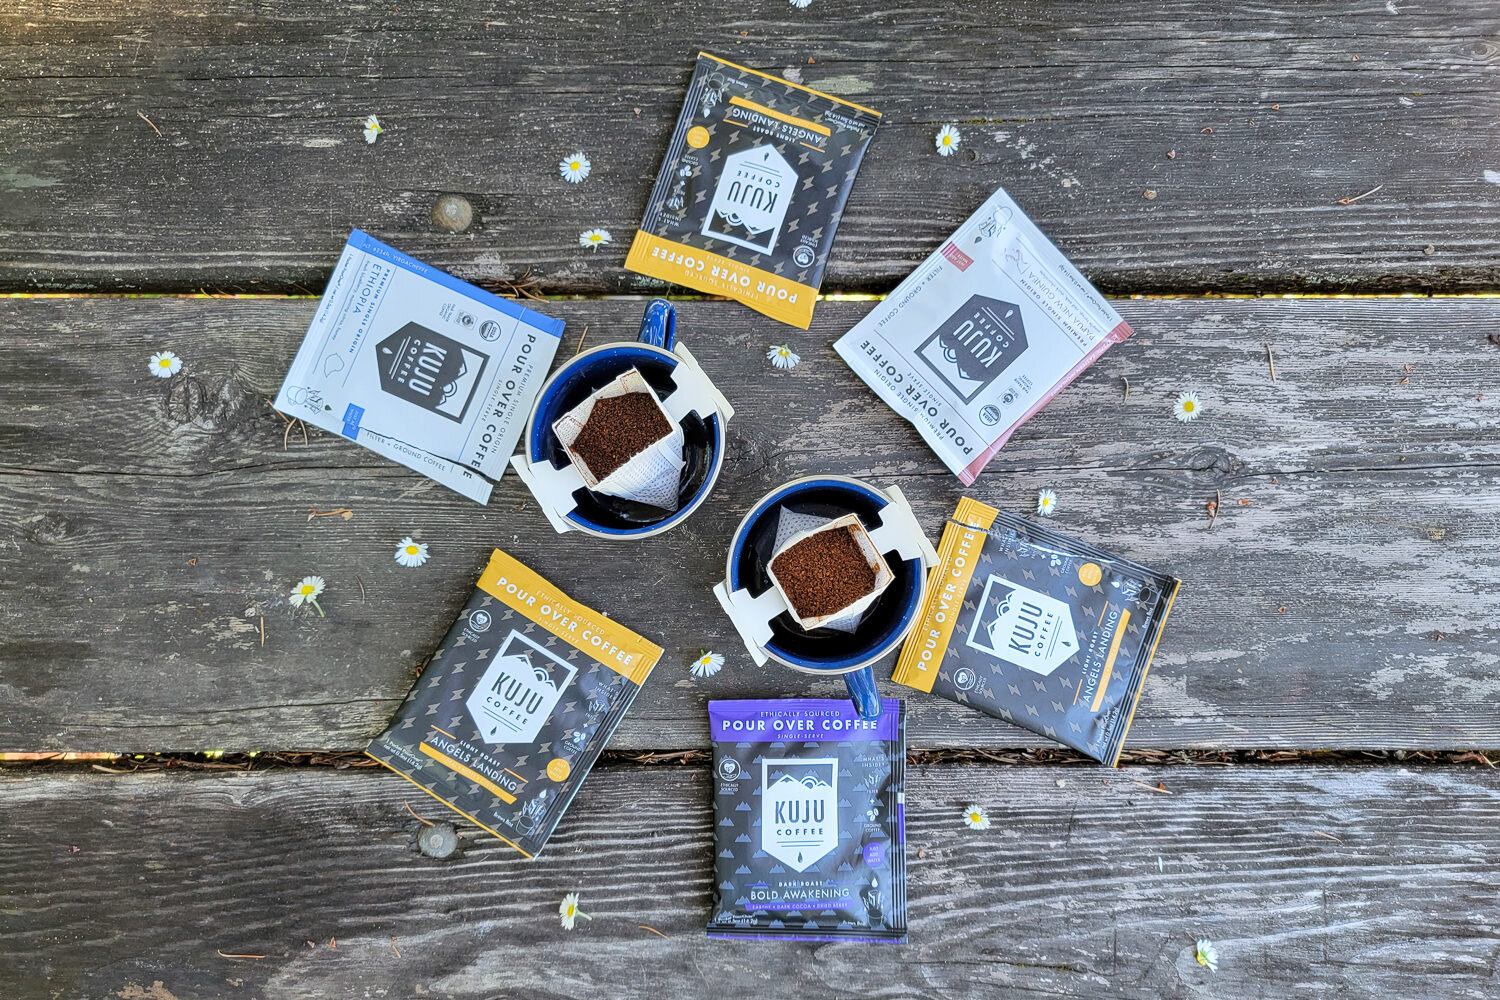 Kuju Coffee Pocket PourOver Coffee come is a variety of flavors & blends